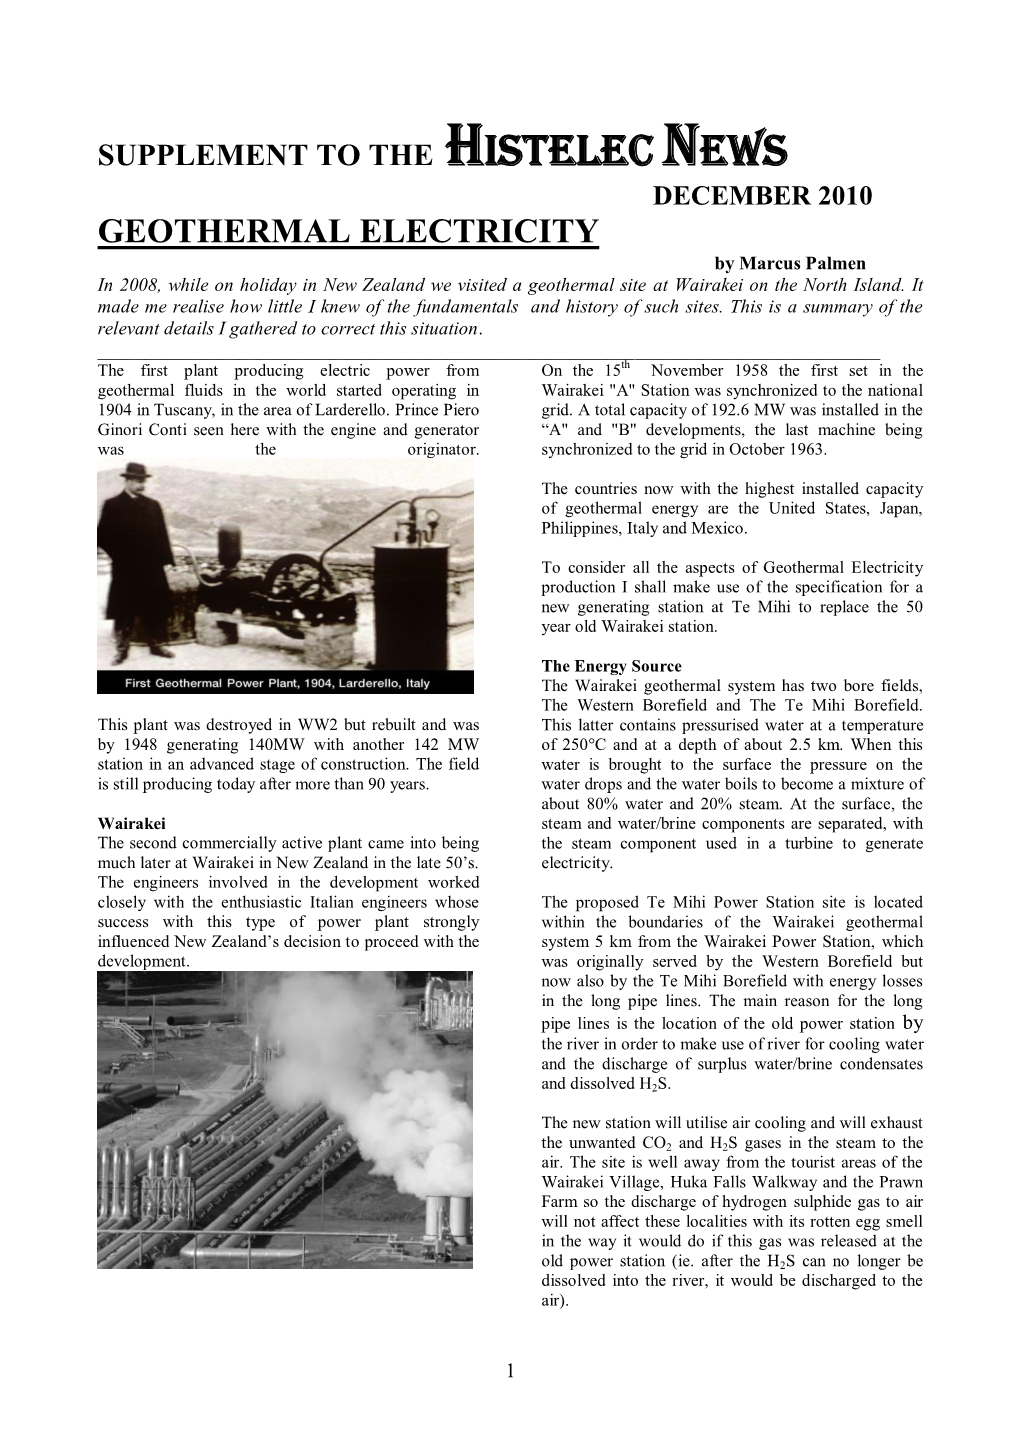 GEOTHERMAL ELECTRICITY by Marcus Palmen in 2008, While on Holiday in New Zealand We Visited a Geothermal Site at Wairakei on the North Island